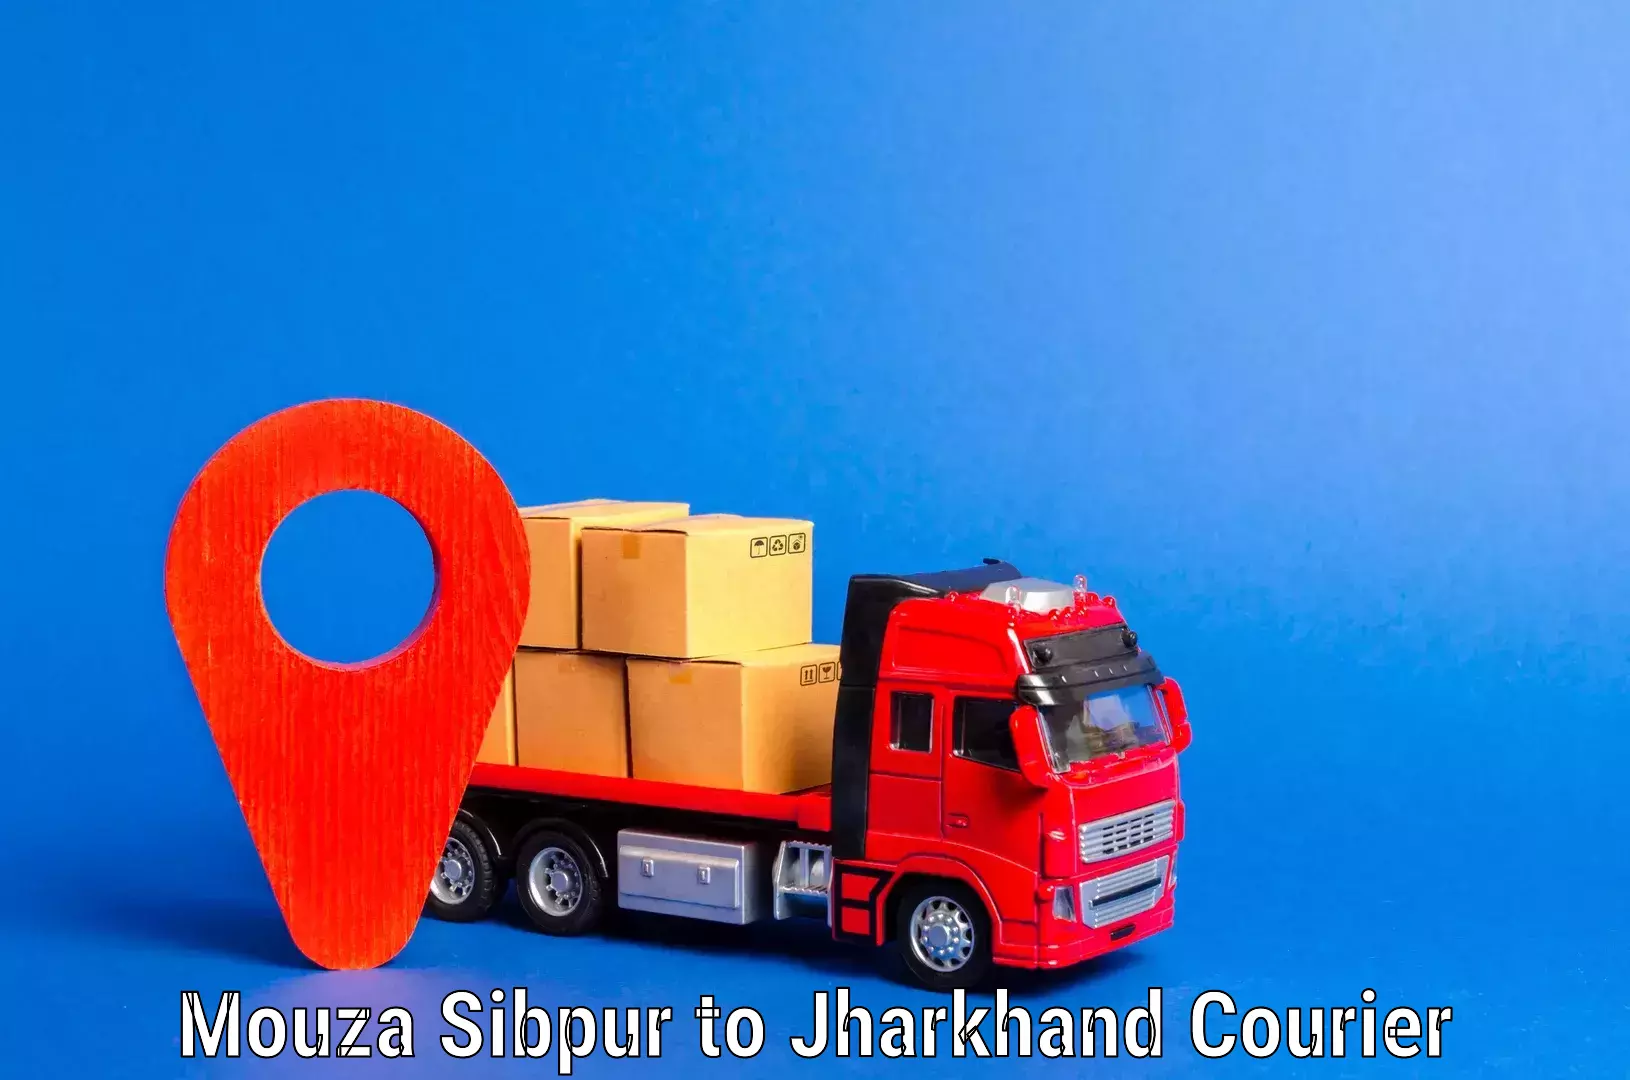 Home moving experts Mouza Sibpur to Jharkhand